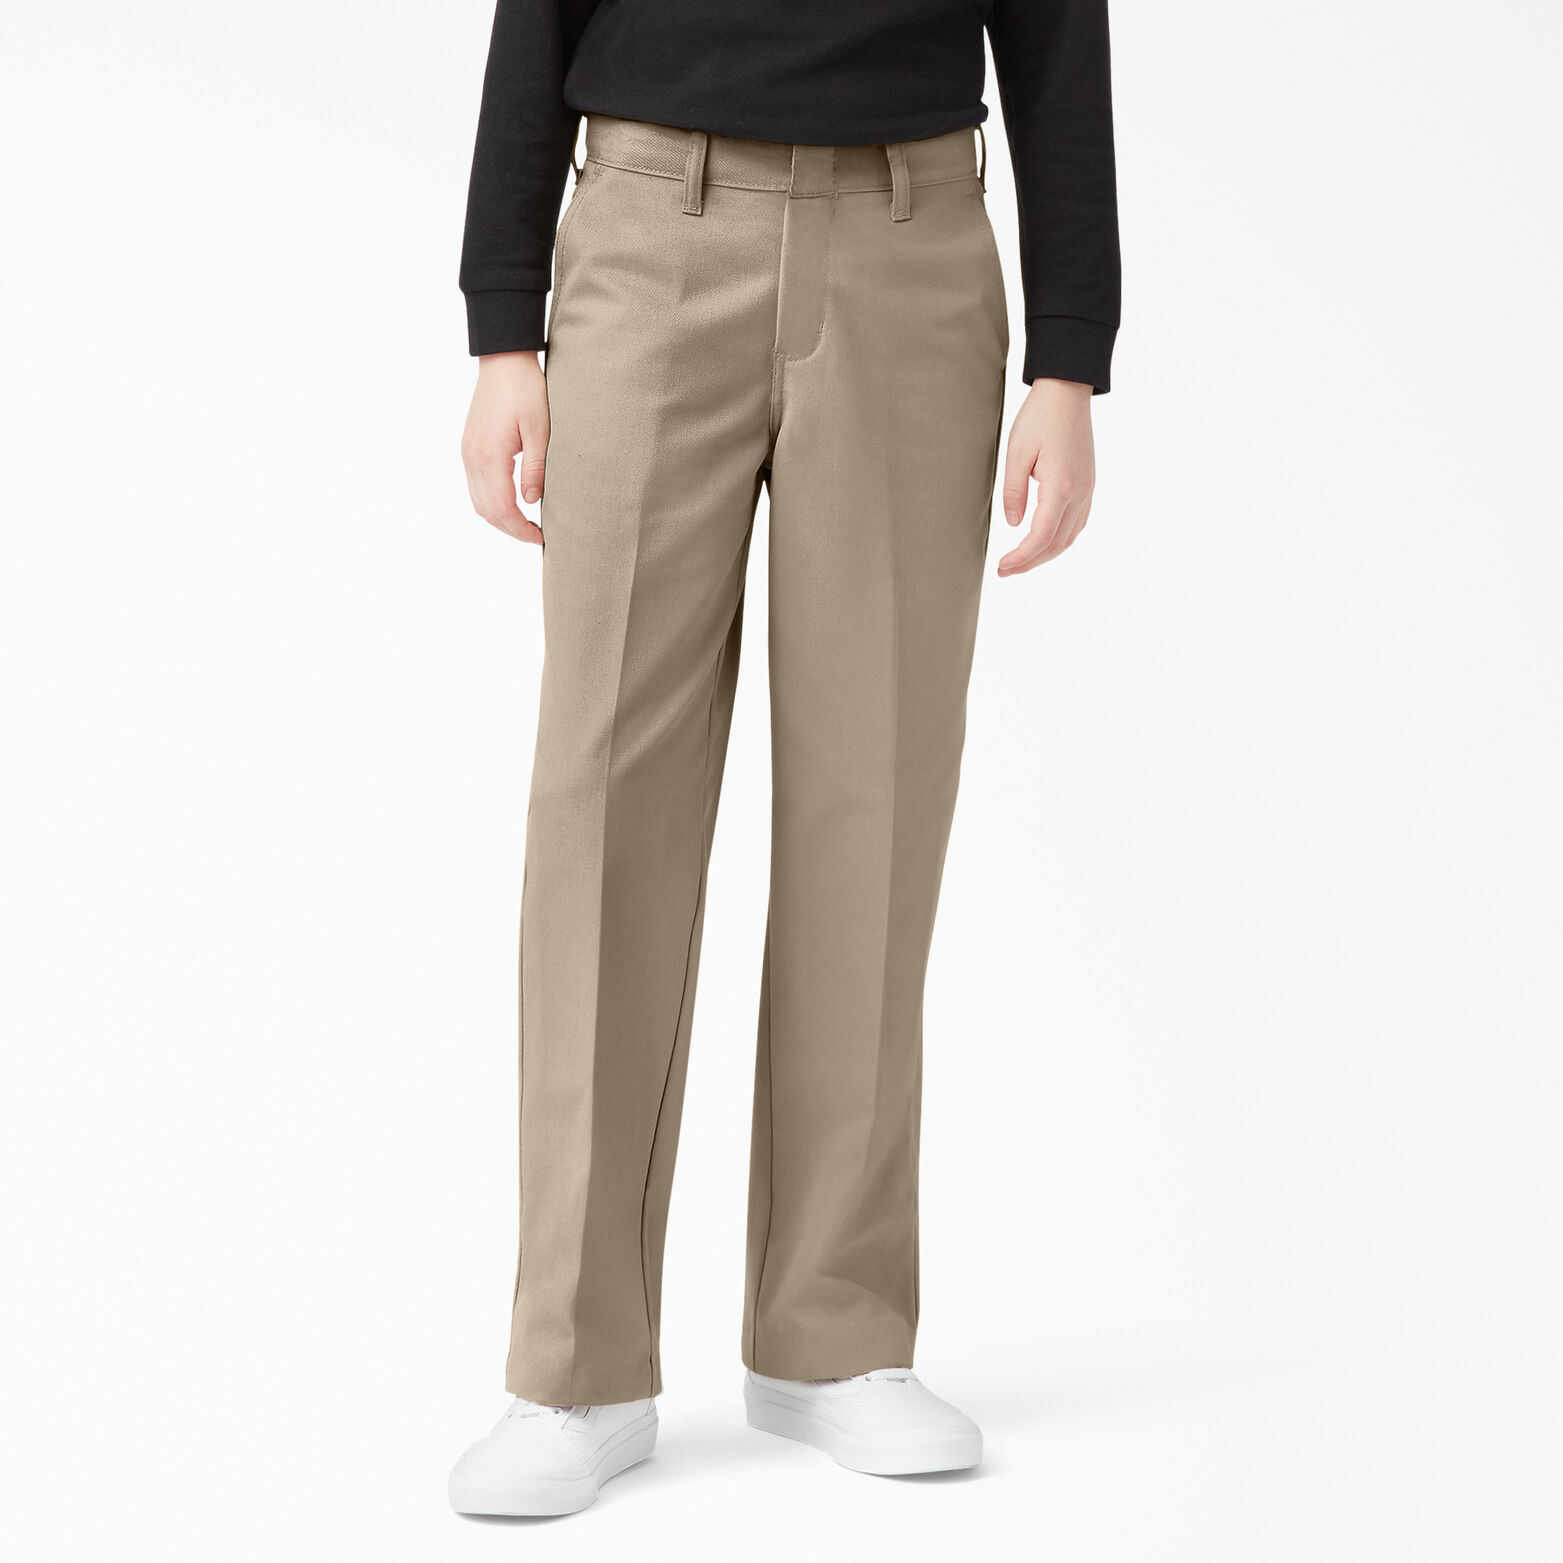 Dickies Boys' Classic Fit Straight Leg Flat Front Pants (various colors/sizes)